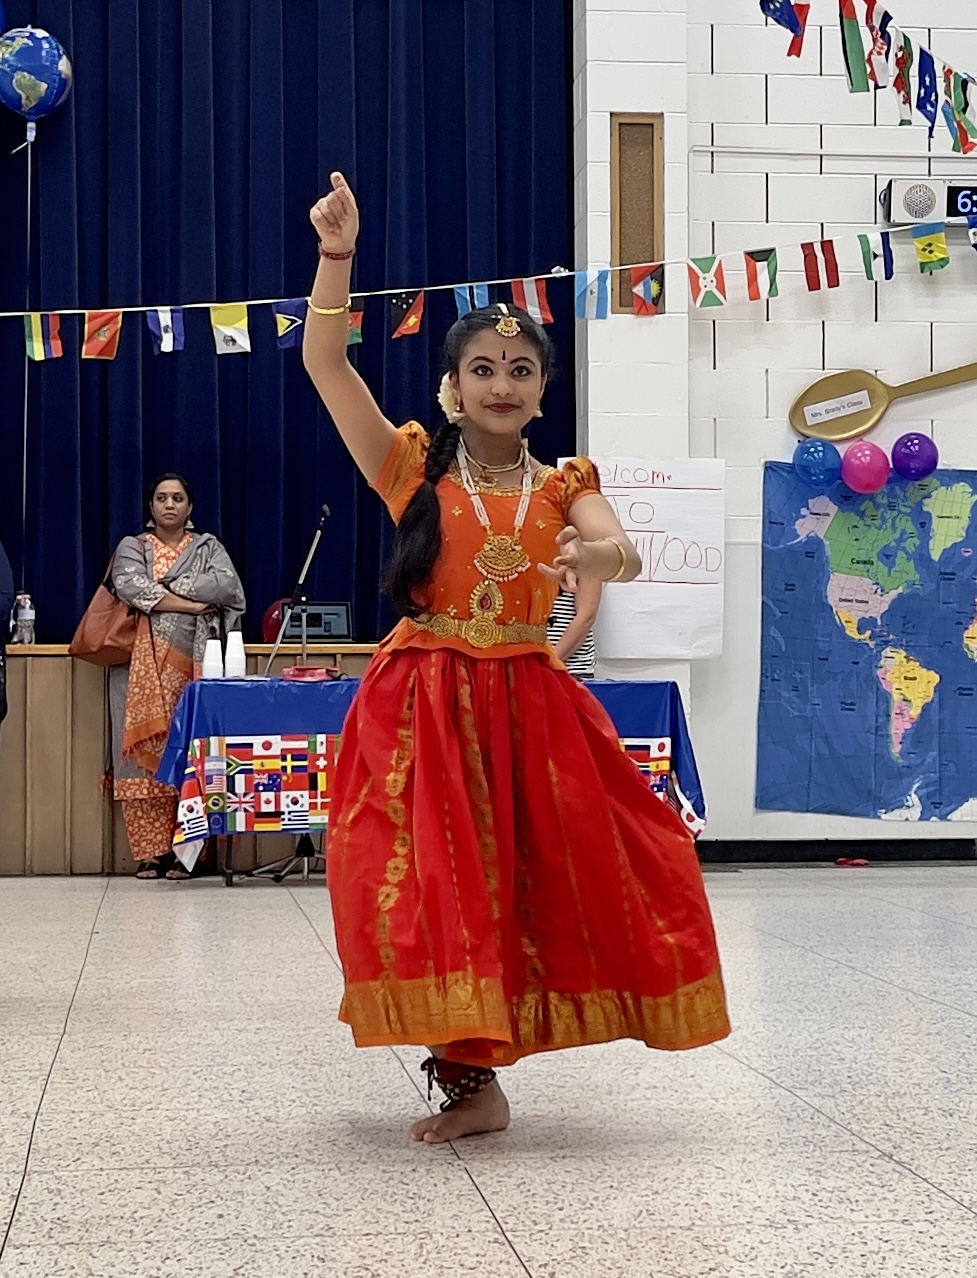 One LES student wearing brightly colored traditional clothes from their culture dances in the LES gym at the International Night event.